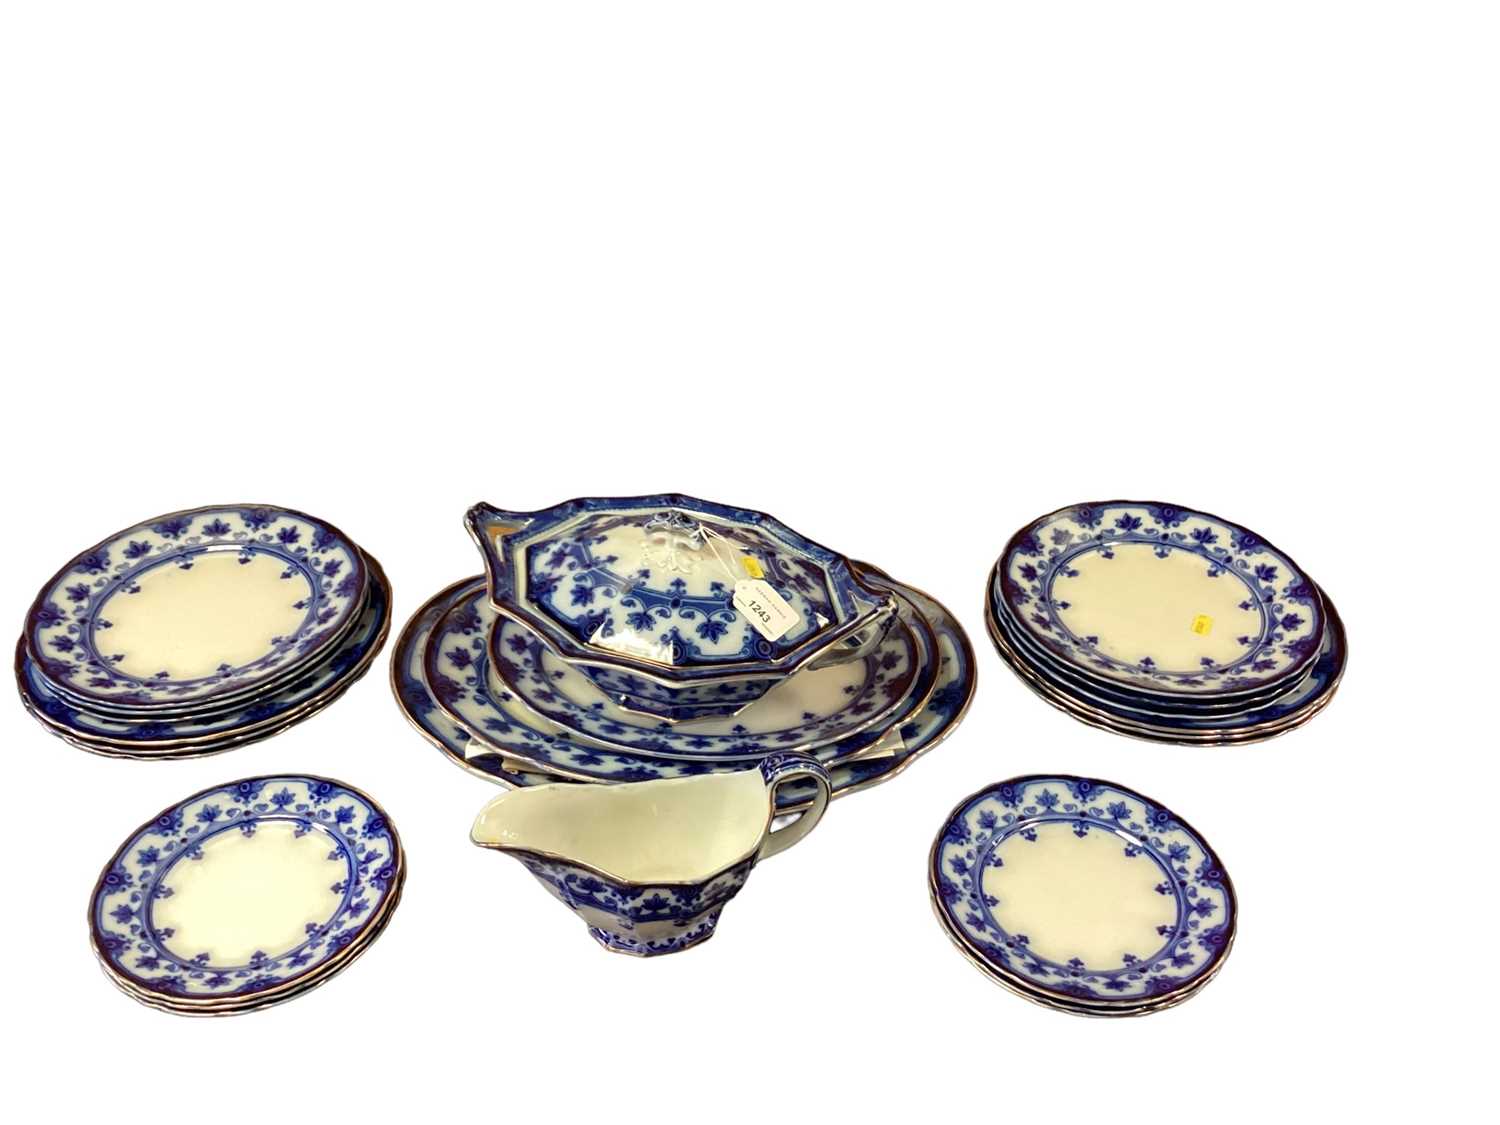 Late Victorian Art Nouveau Ford & Sons 'Dudley' pattern flow blue and white dinner service